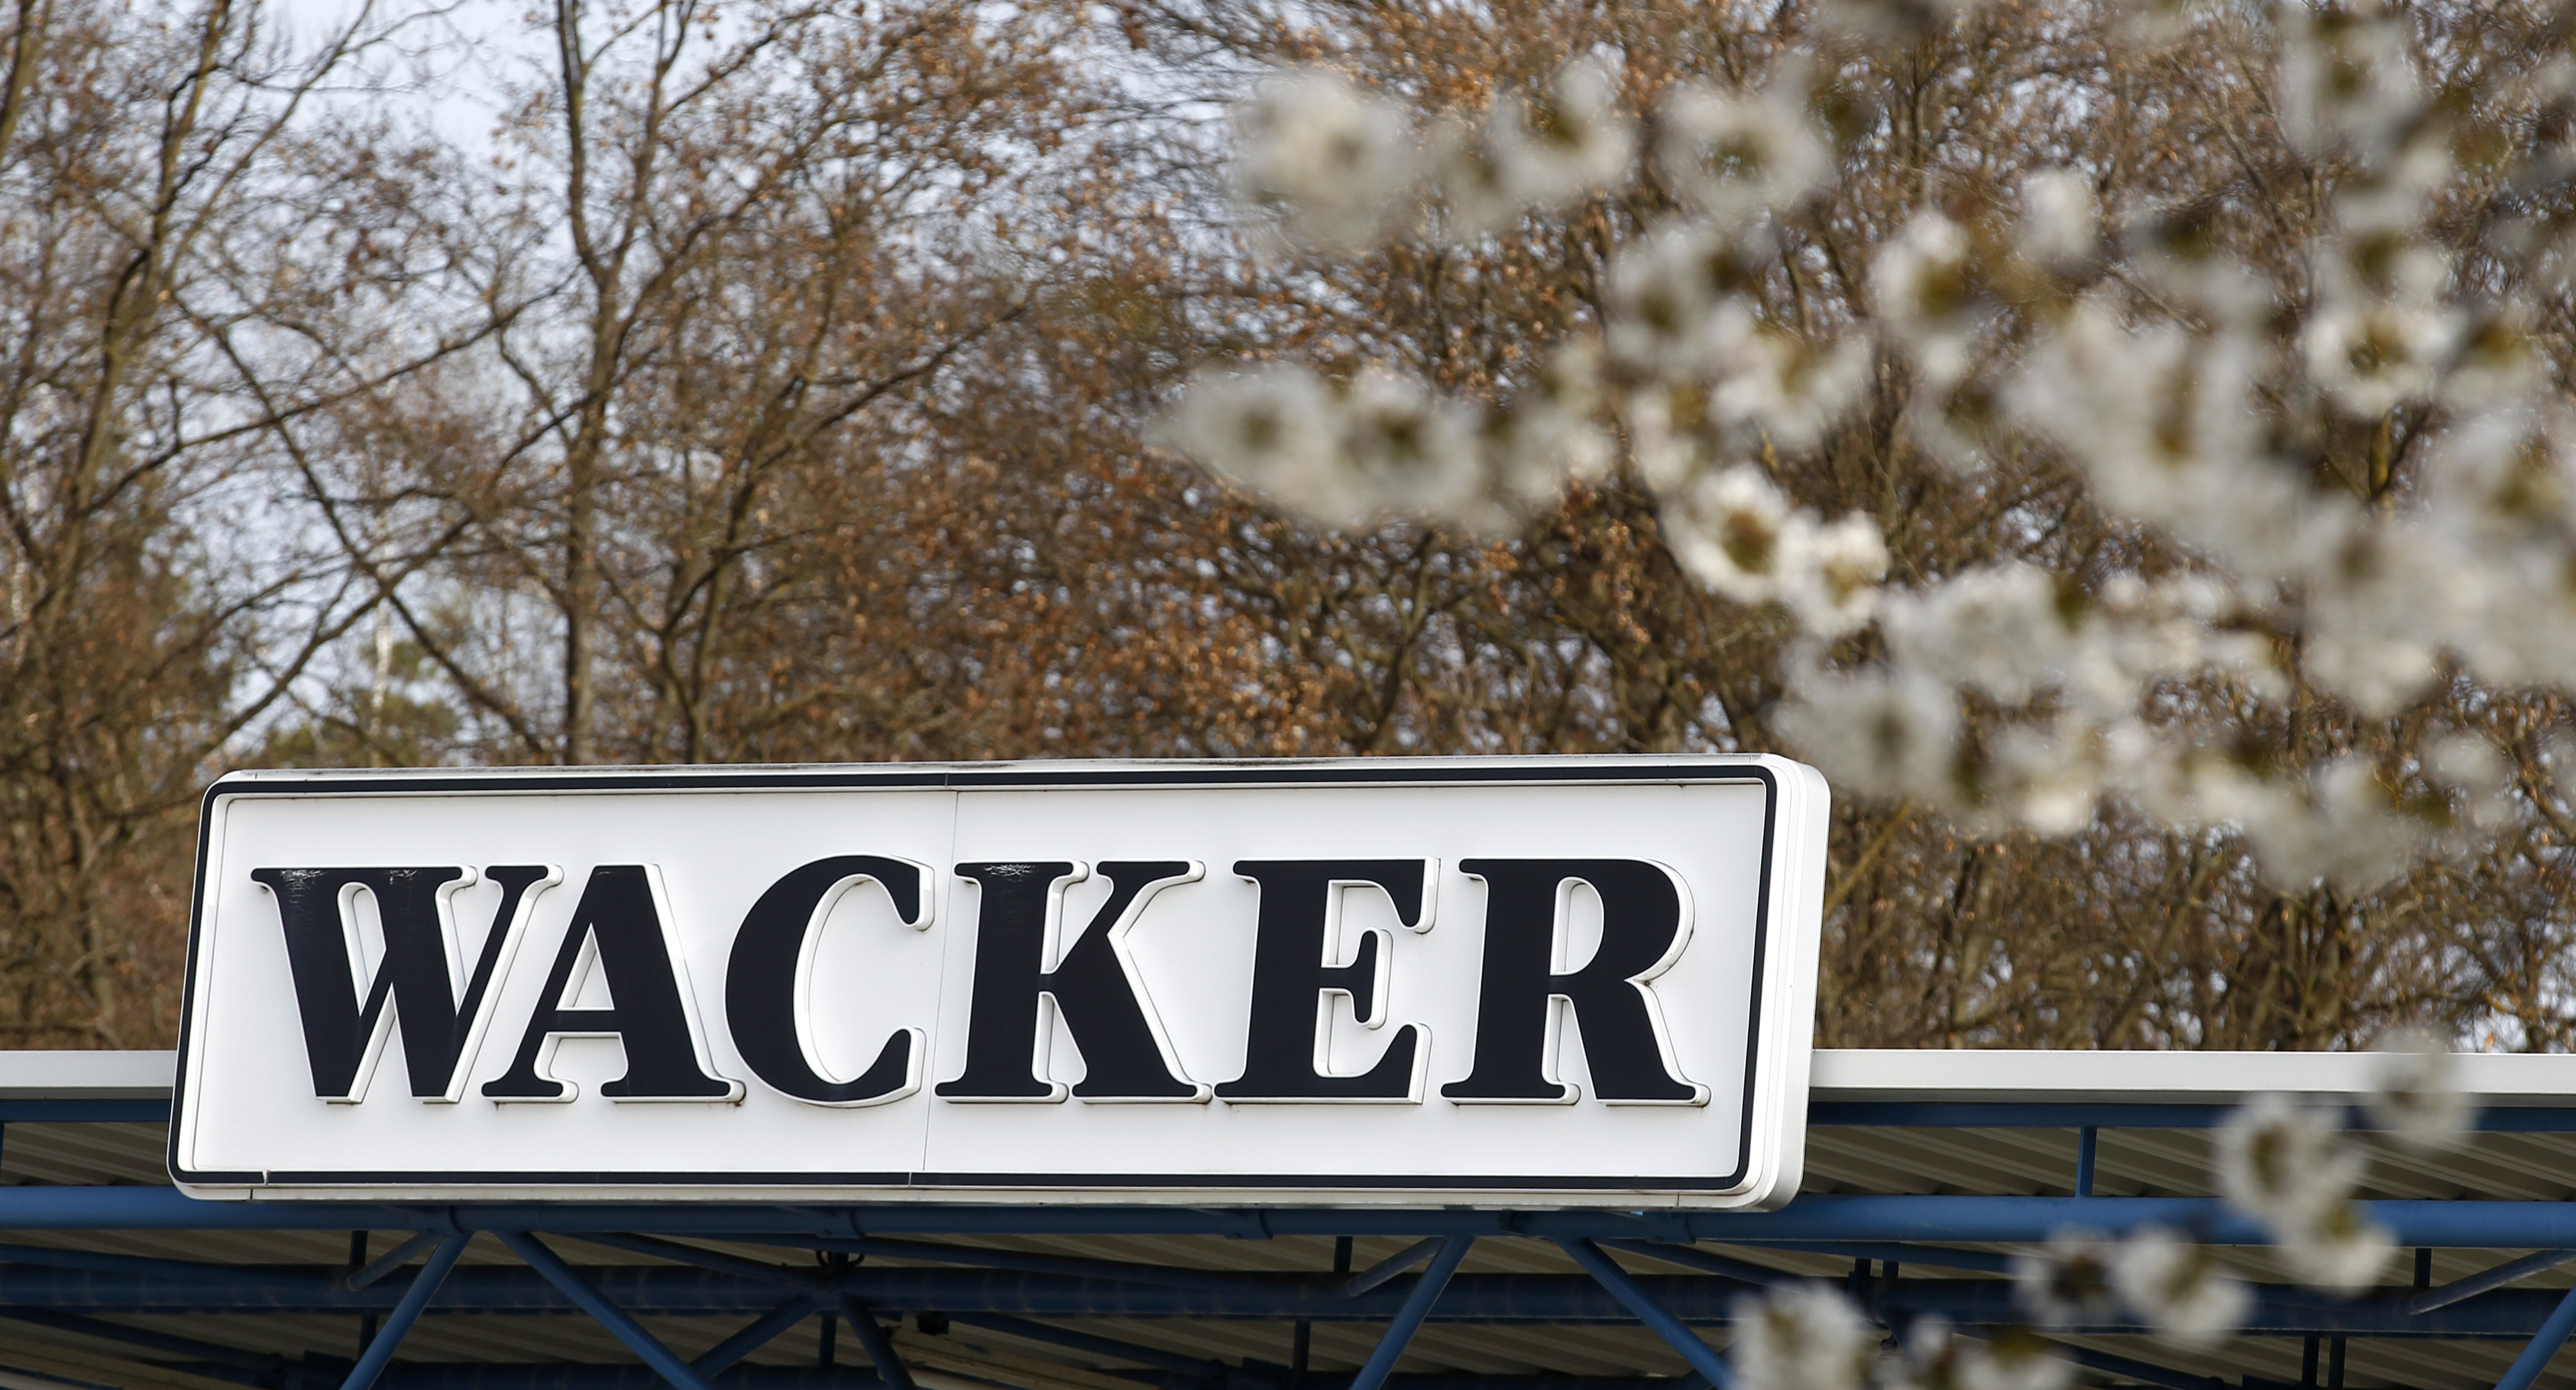 The logo of Wacker Chemie AG is seen at its manufacturing plant in the south-east Bavarian town of Burghausen